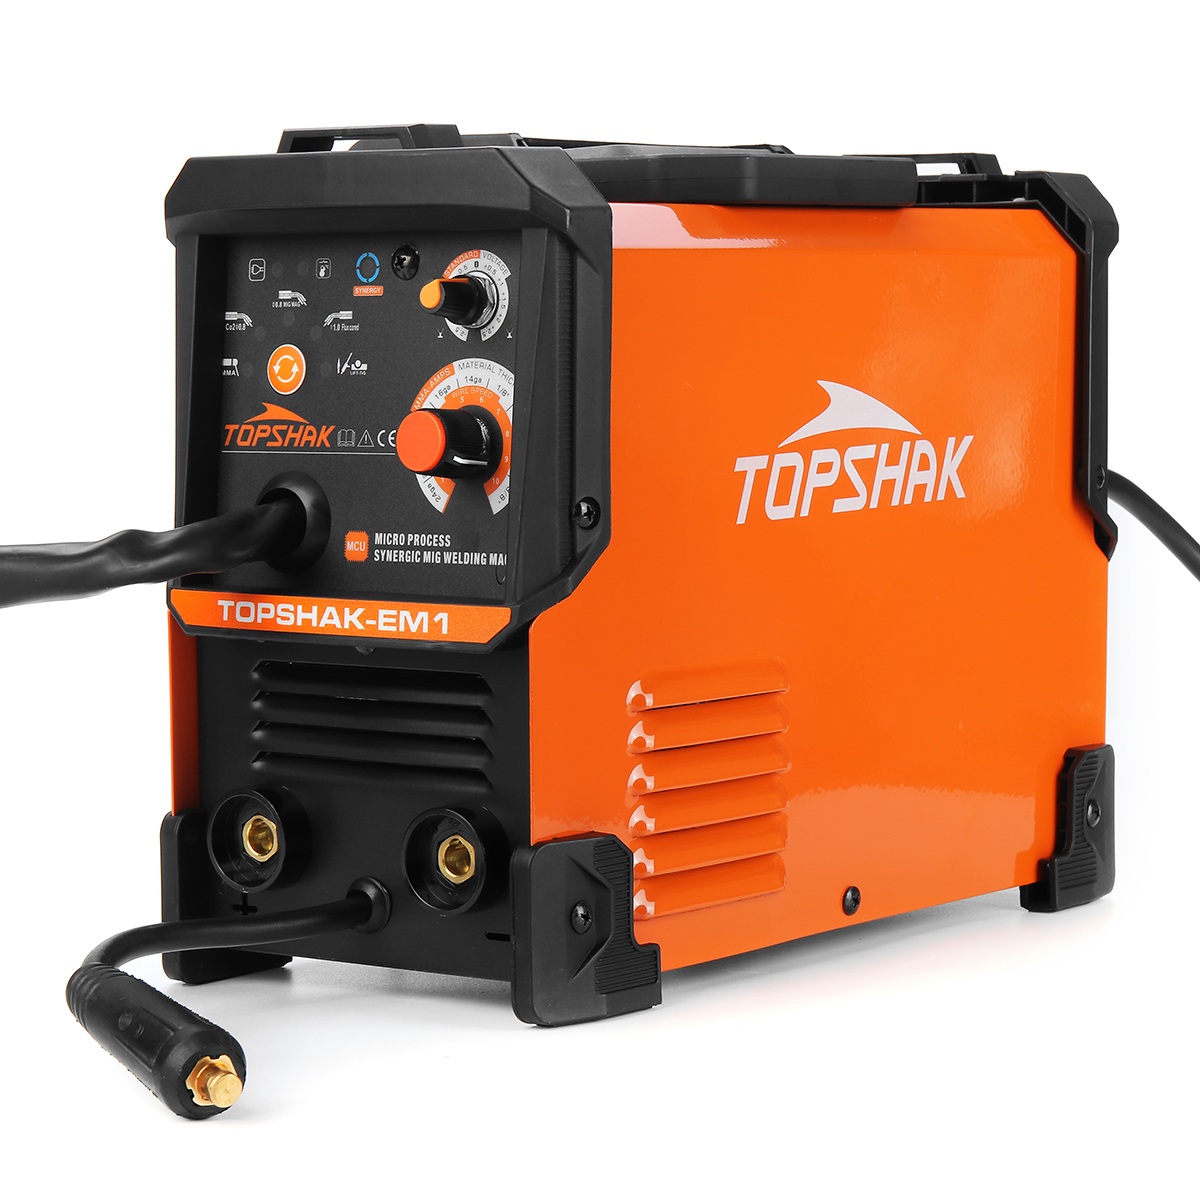 Find Topshak TS-EM1 220V 3-in-1 160A Multifunctional Welding Machine with MlG/MAG/FCW/MMA/TIG Welding Tools for Sale on Gipsybee.com with cryptocurrencies